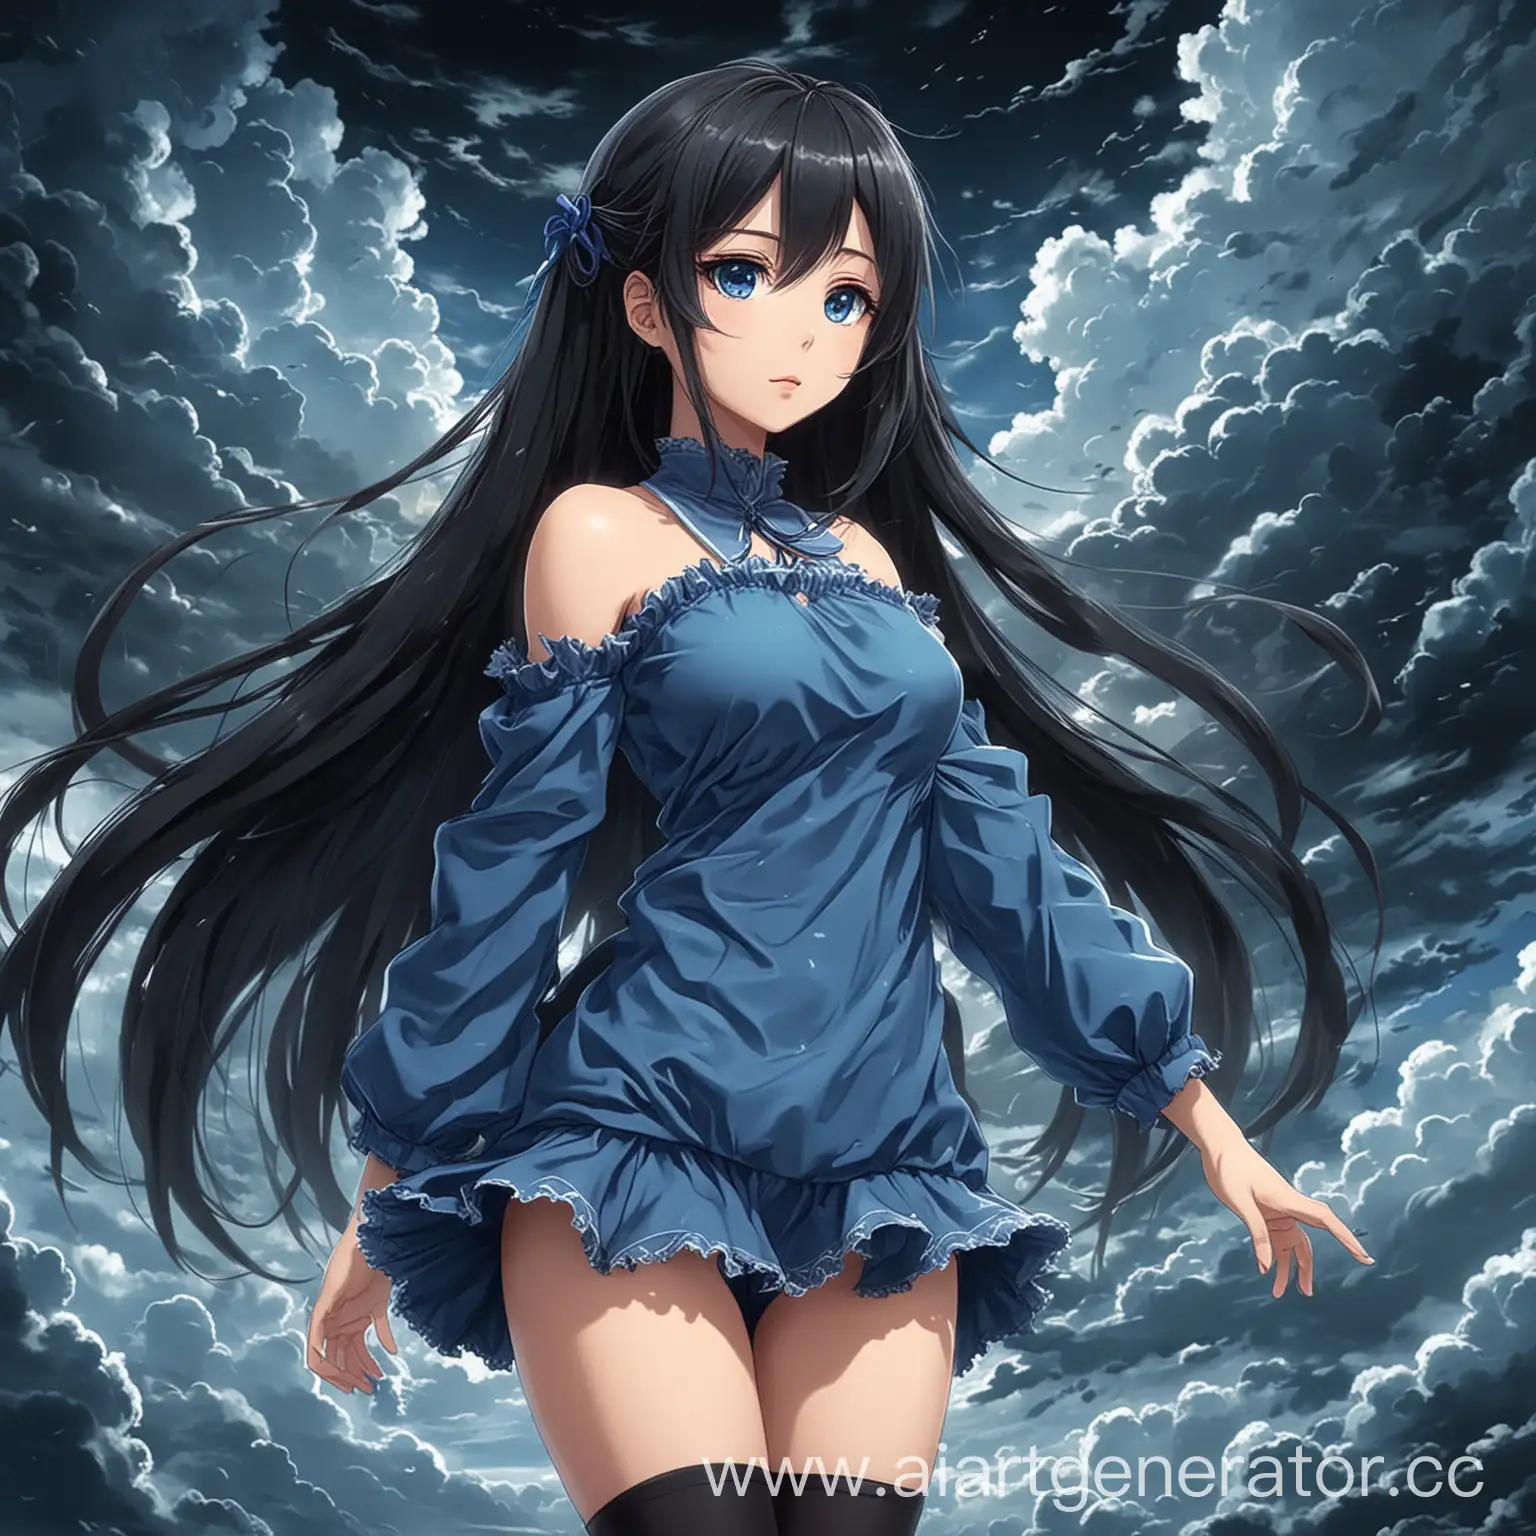 Anime-Girl-Amidst-BlueBlack-Clouds-with-Flowing-Long-Hair